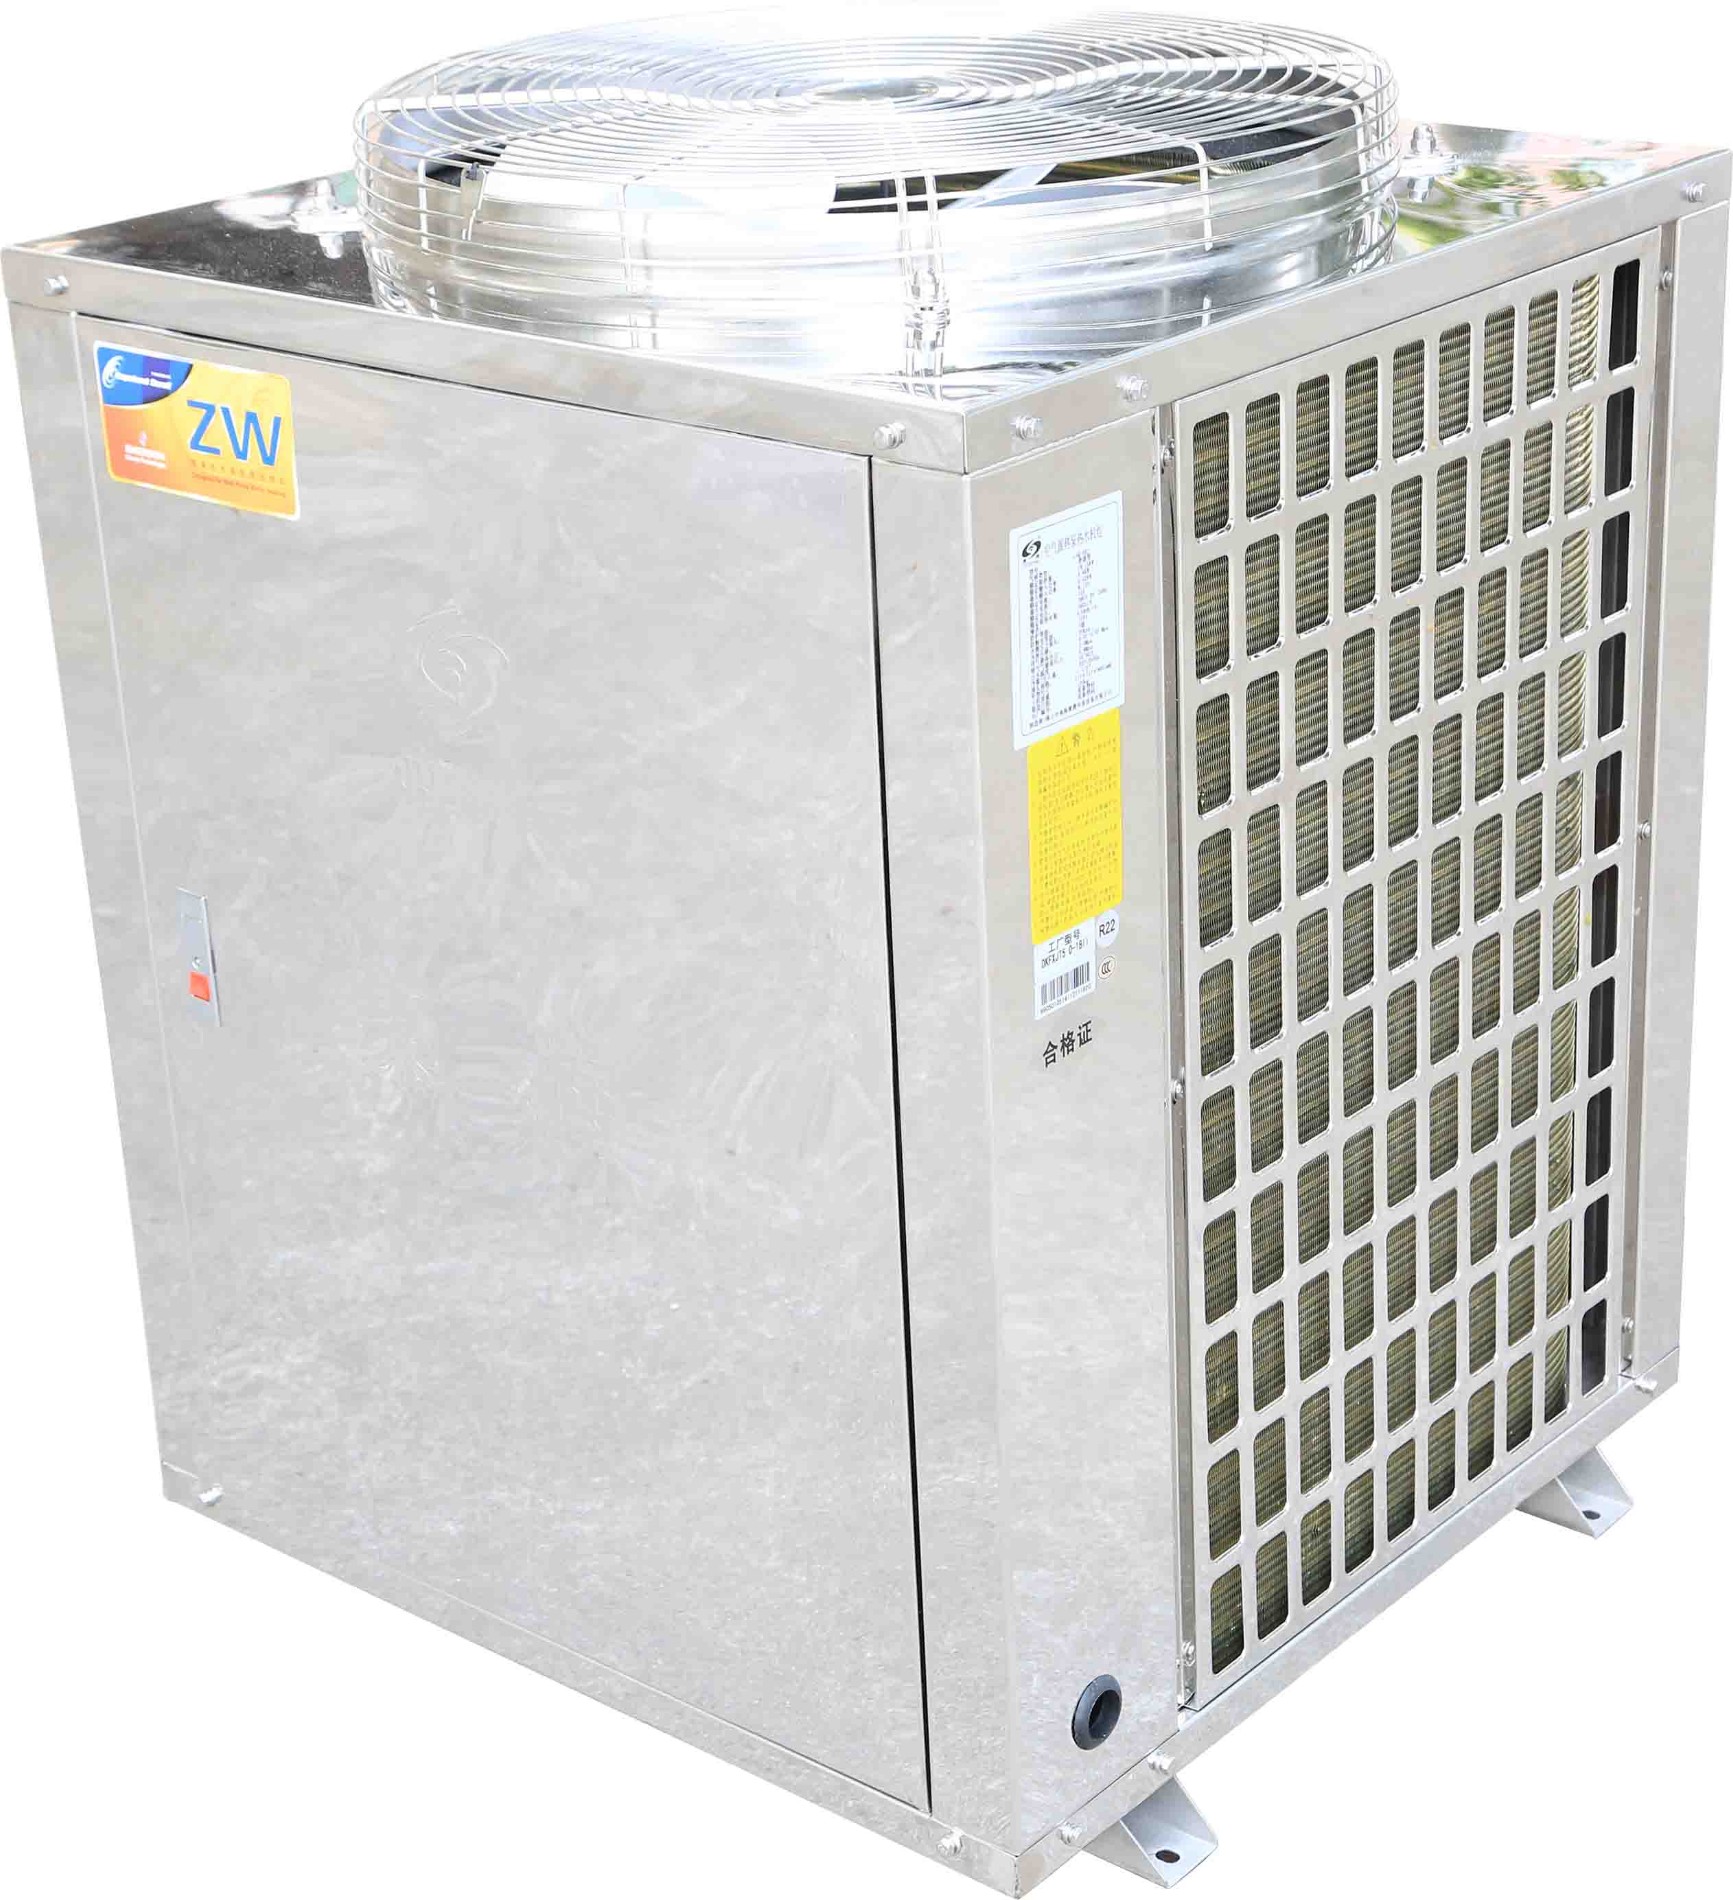 High quality energy saving techology  Commercial And Residential Heating And Cooling Quotes,China heat pump equipment Commercial And Residential Heating And Cooling Factory, pump equipmentCommercial And Residential Heating And Cooling Purchasing